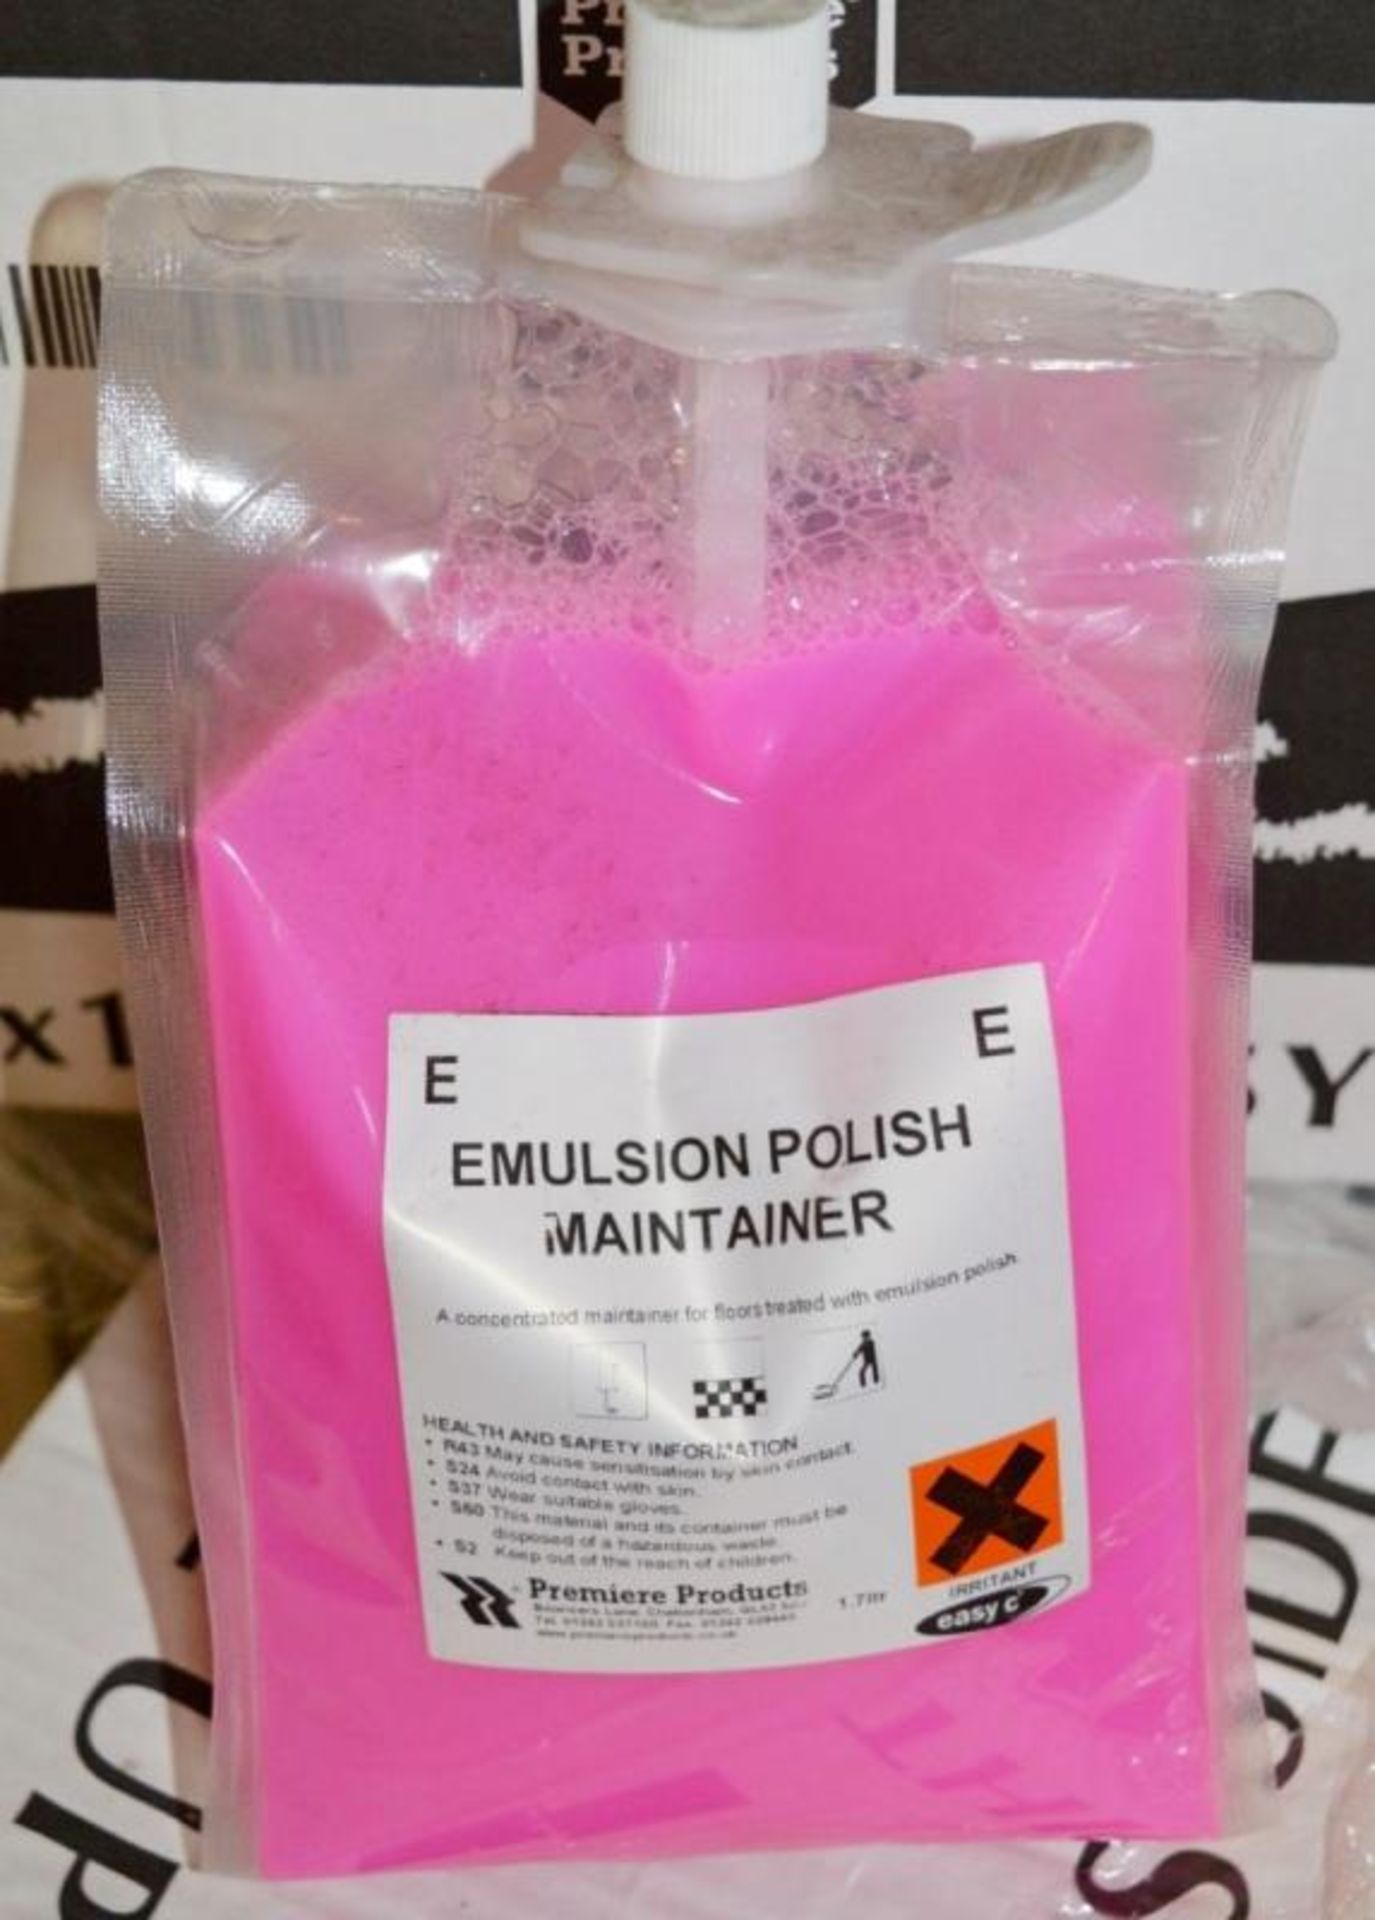 40 x Premiere Products 1.7 Litre Easy C (E) Emulson Polish Maintainer - Suitable For Dispnesers -